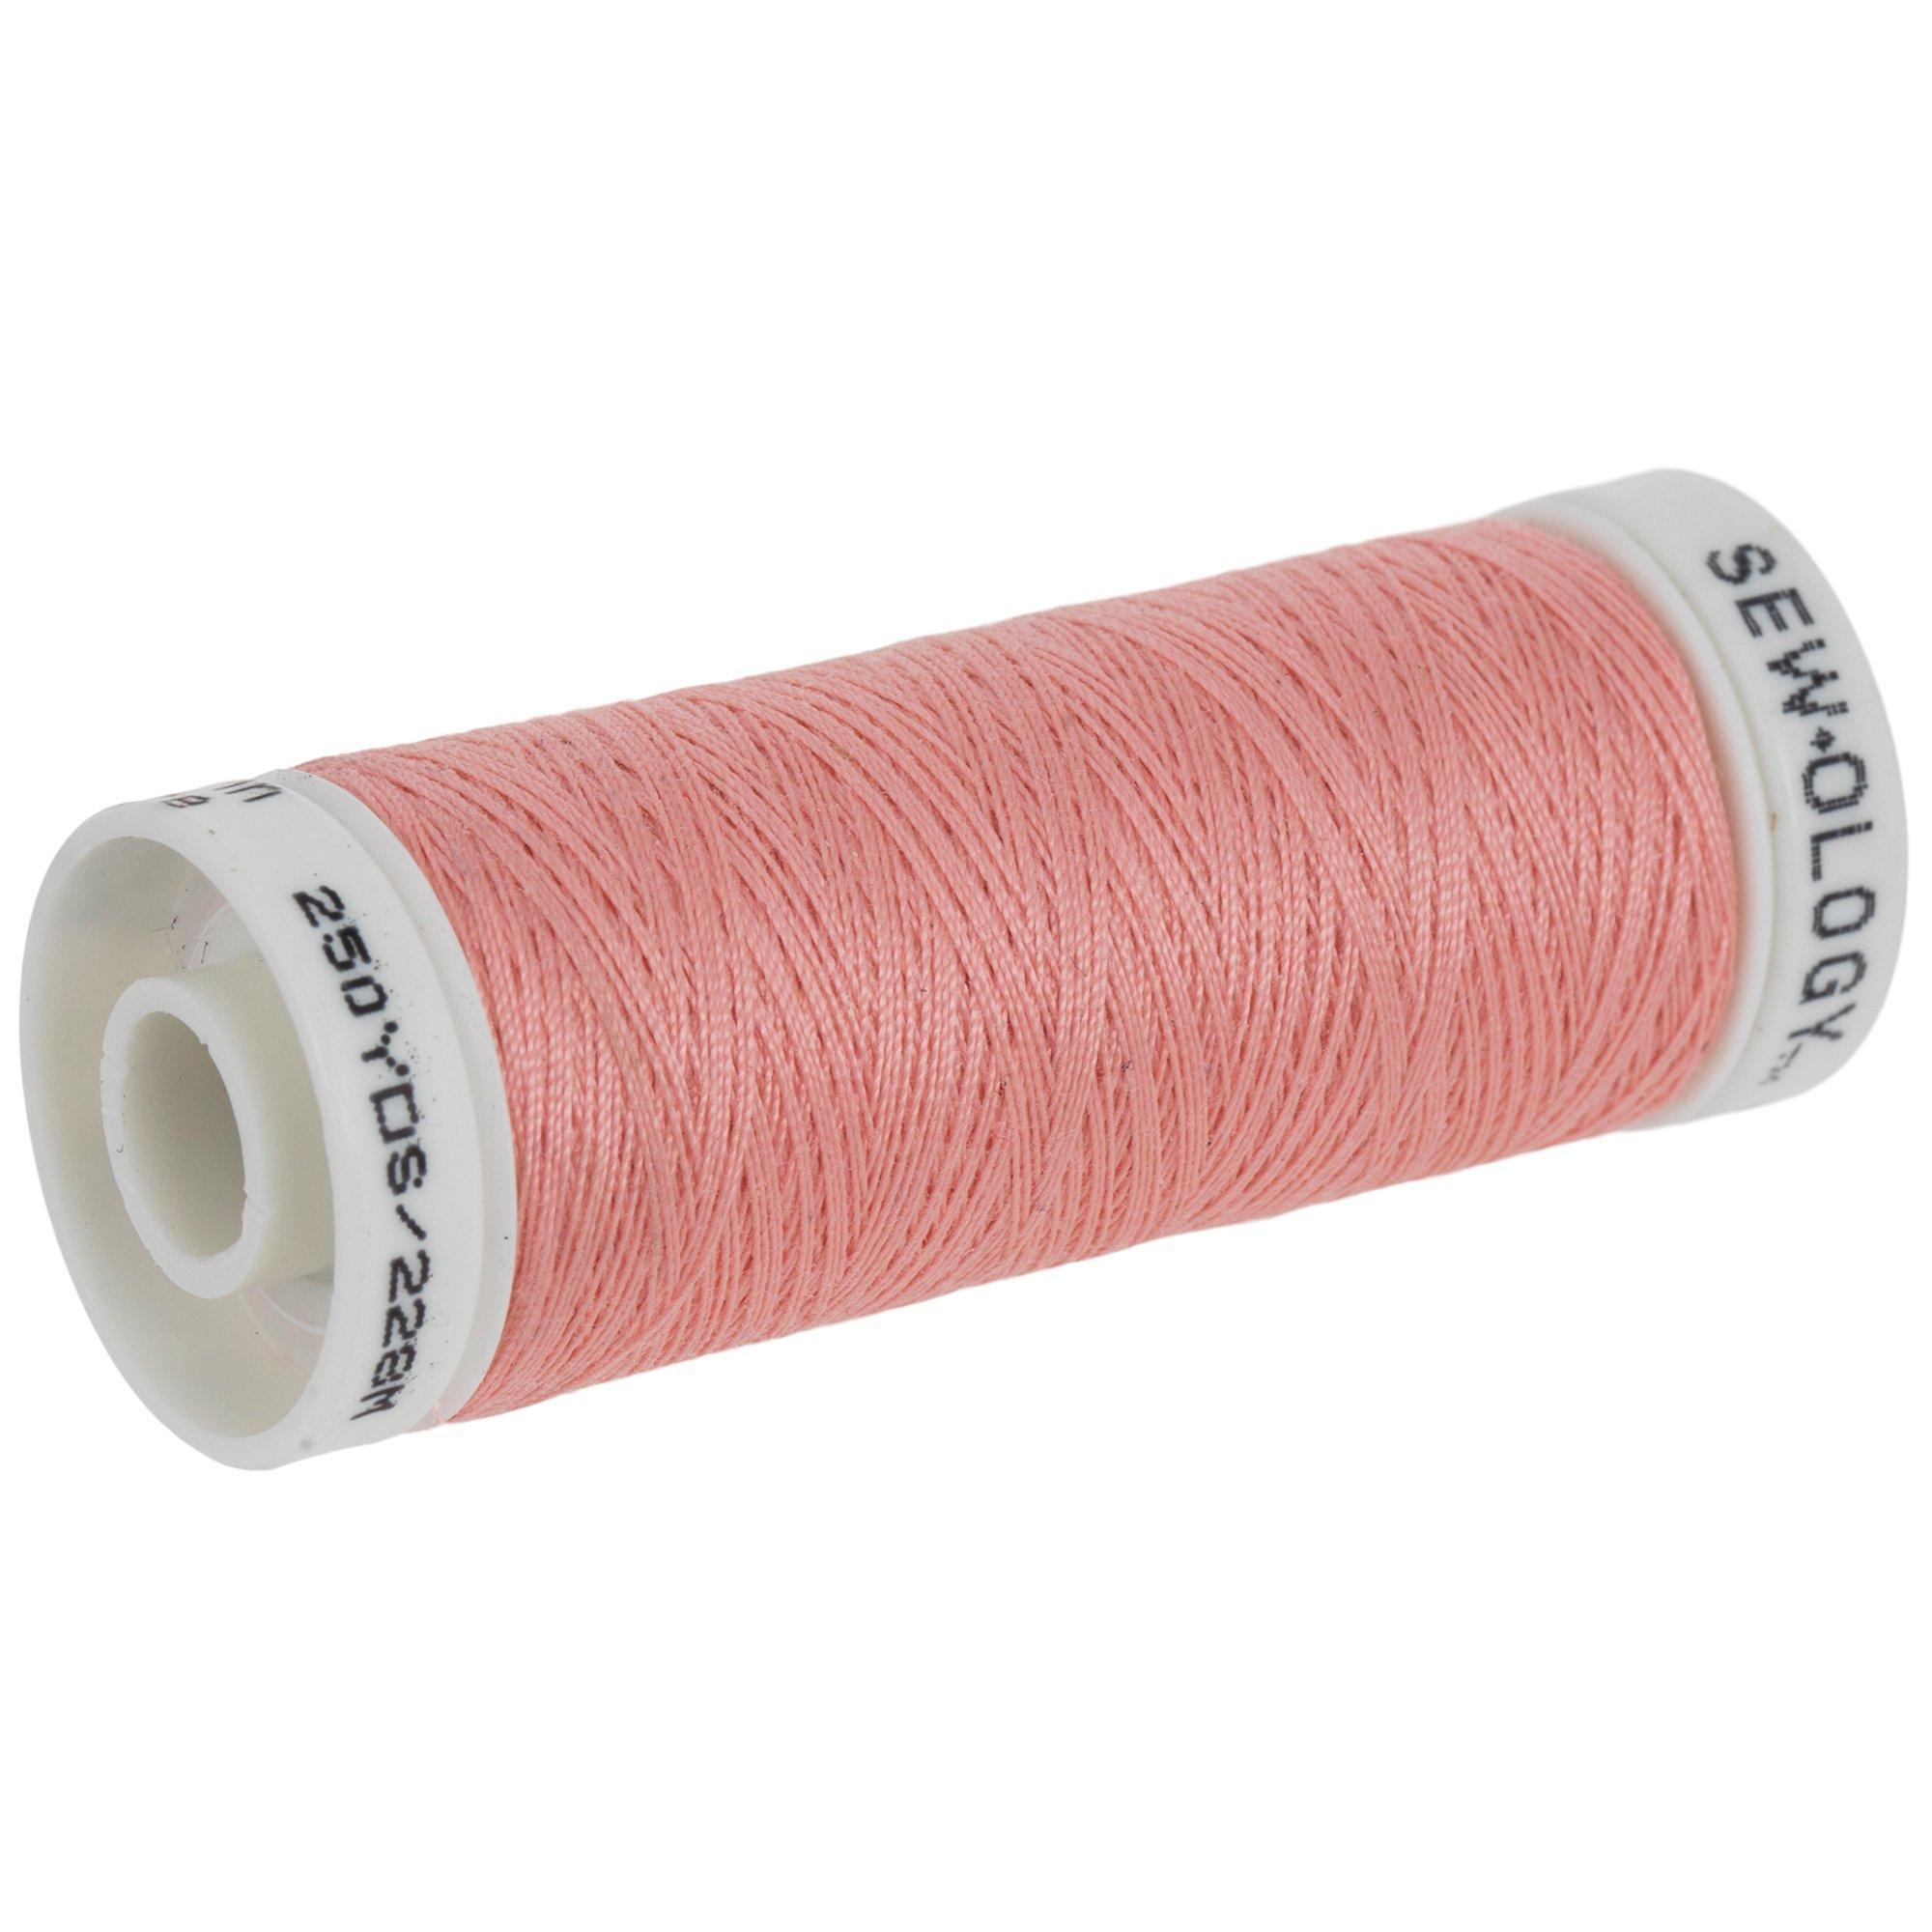  Polyester Quilting Sewing Supply Pink Thread 10 Pcs